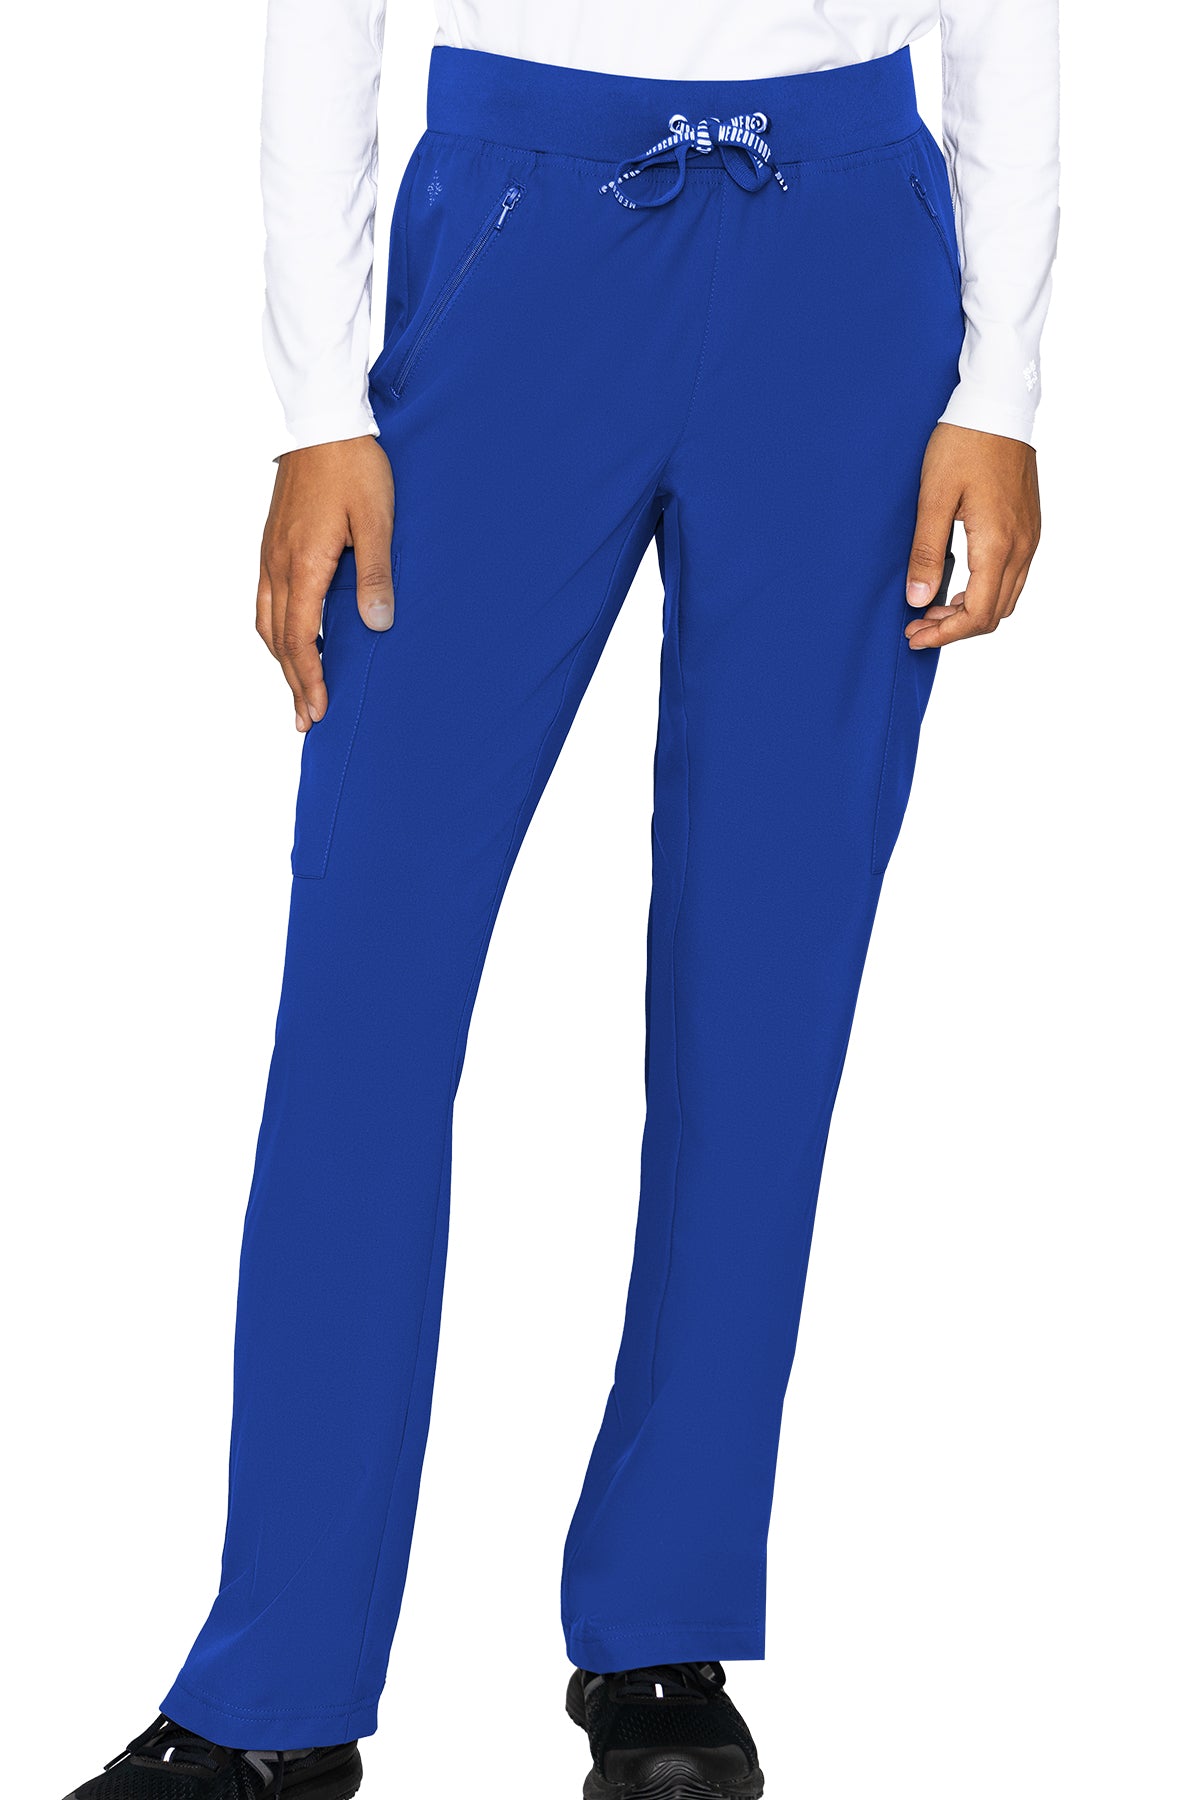 Med Couture Scrub Pants Insight Zipper Pocket Pant in Royal at Parker's Clothing and Shoes